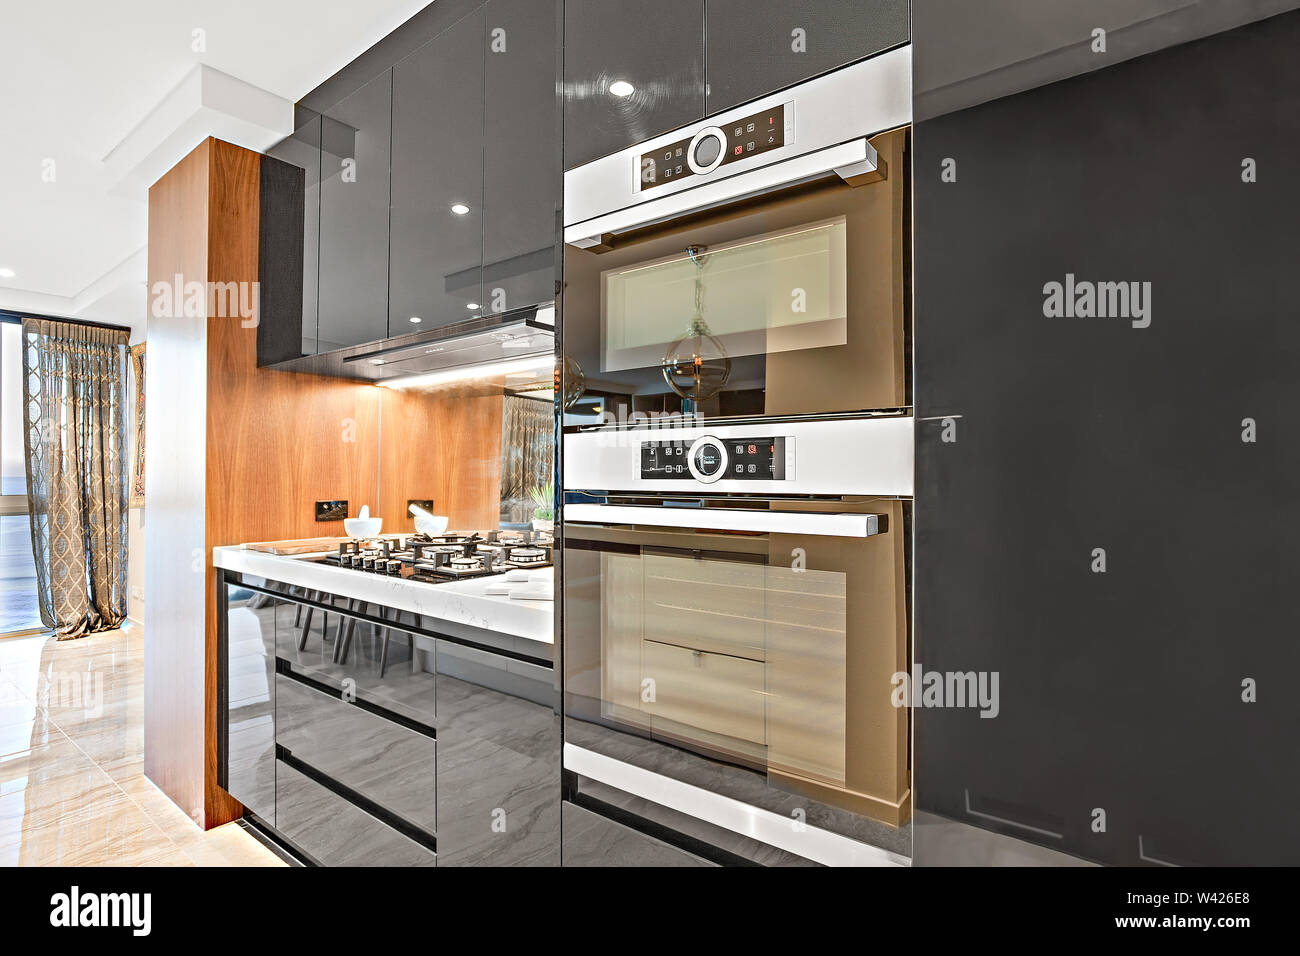 A Modular Kitchen Featuring Designer Cabinets Gas Hob And